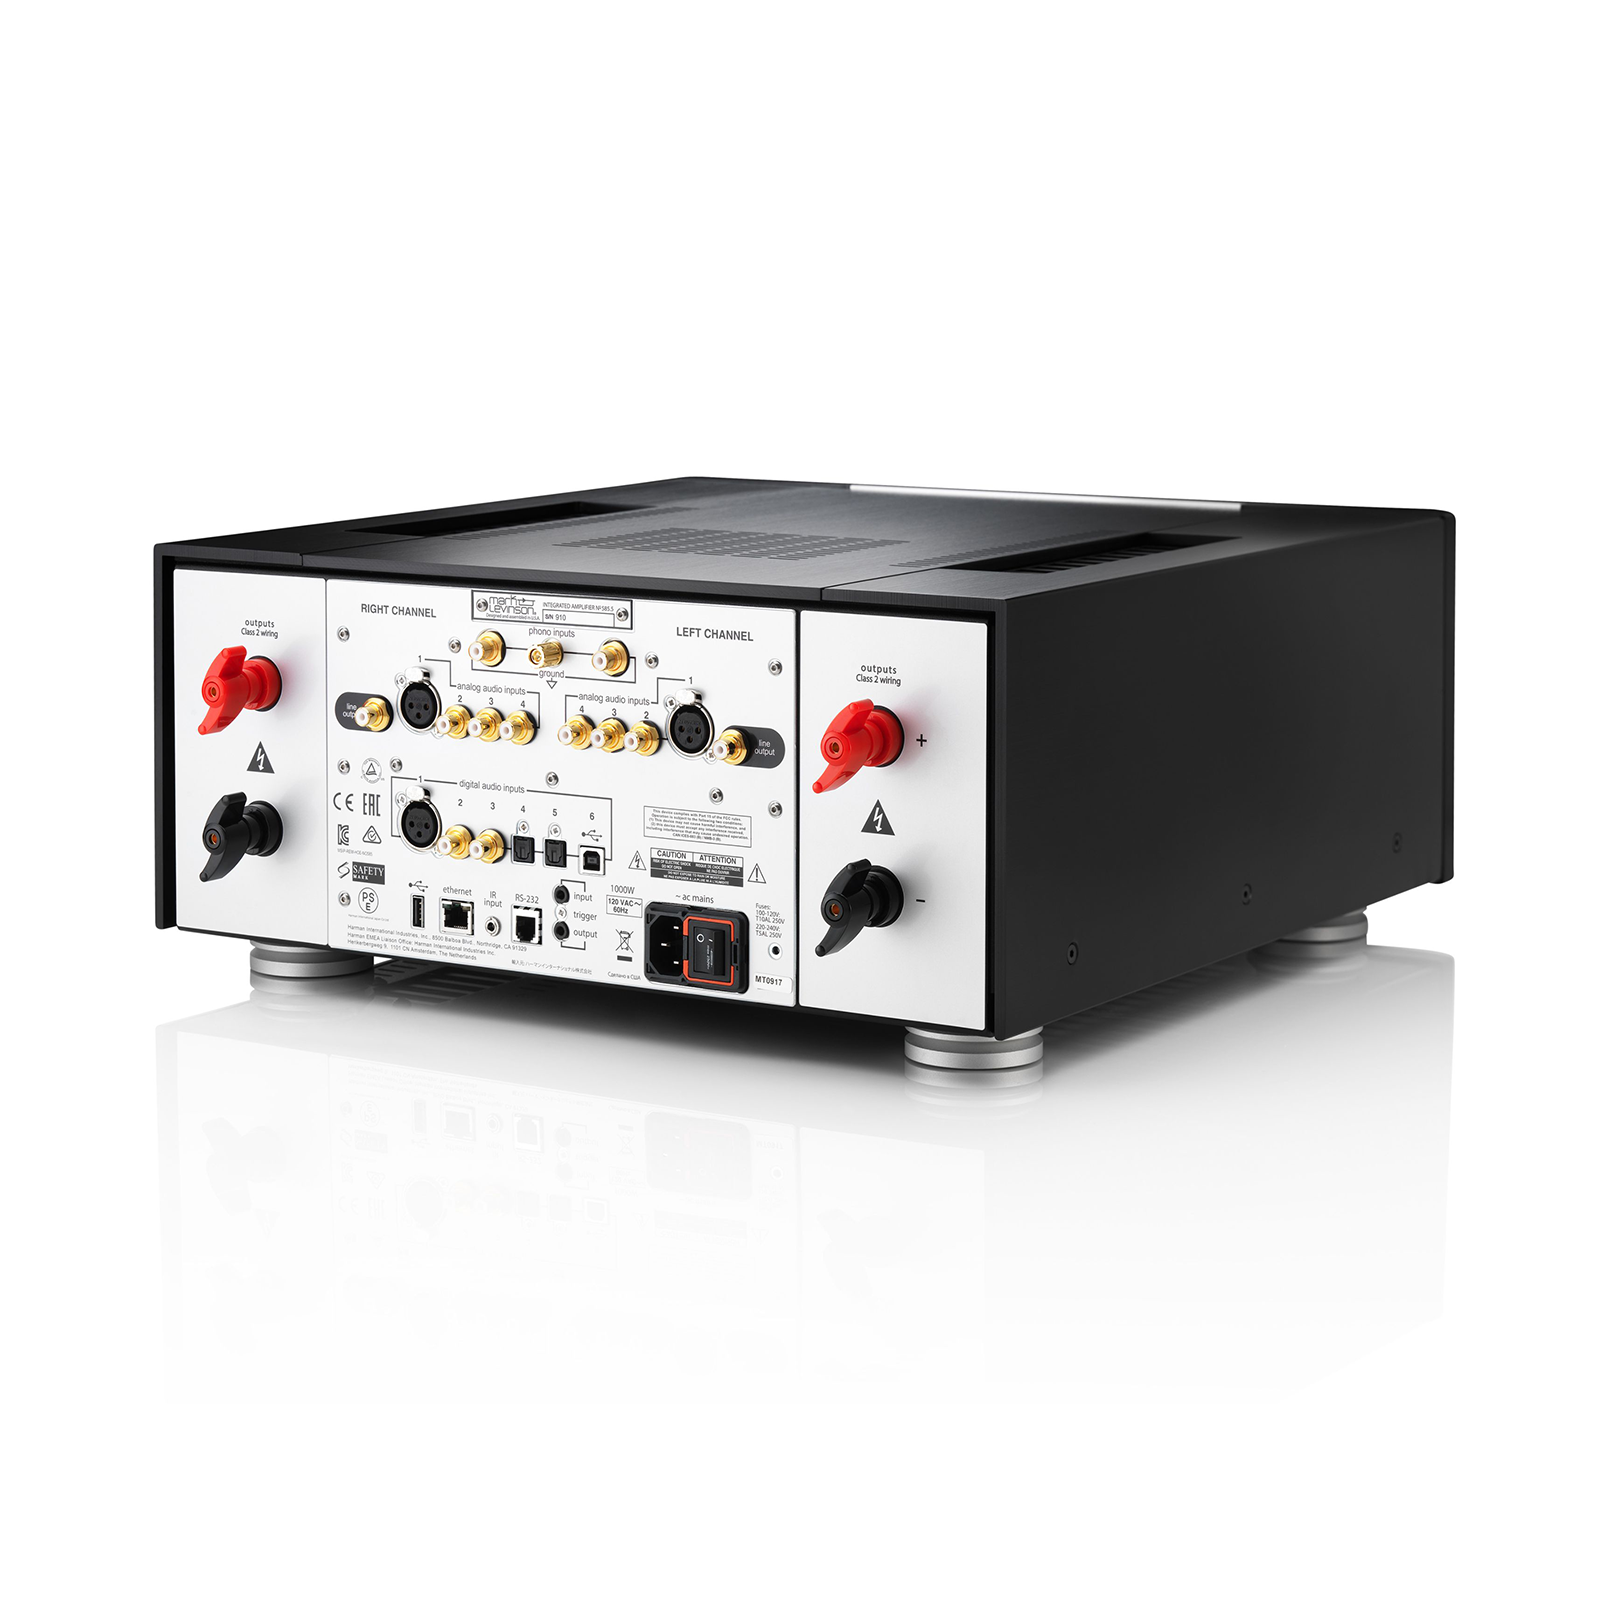 Nº585.5 - Black - Fully Discrete Integrated Amplifier with Class A Pure Phono Stage - Detailshot 3